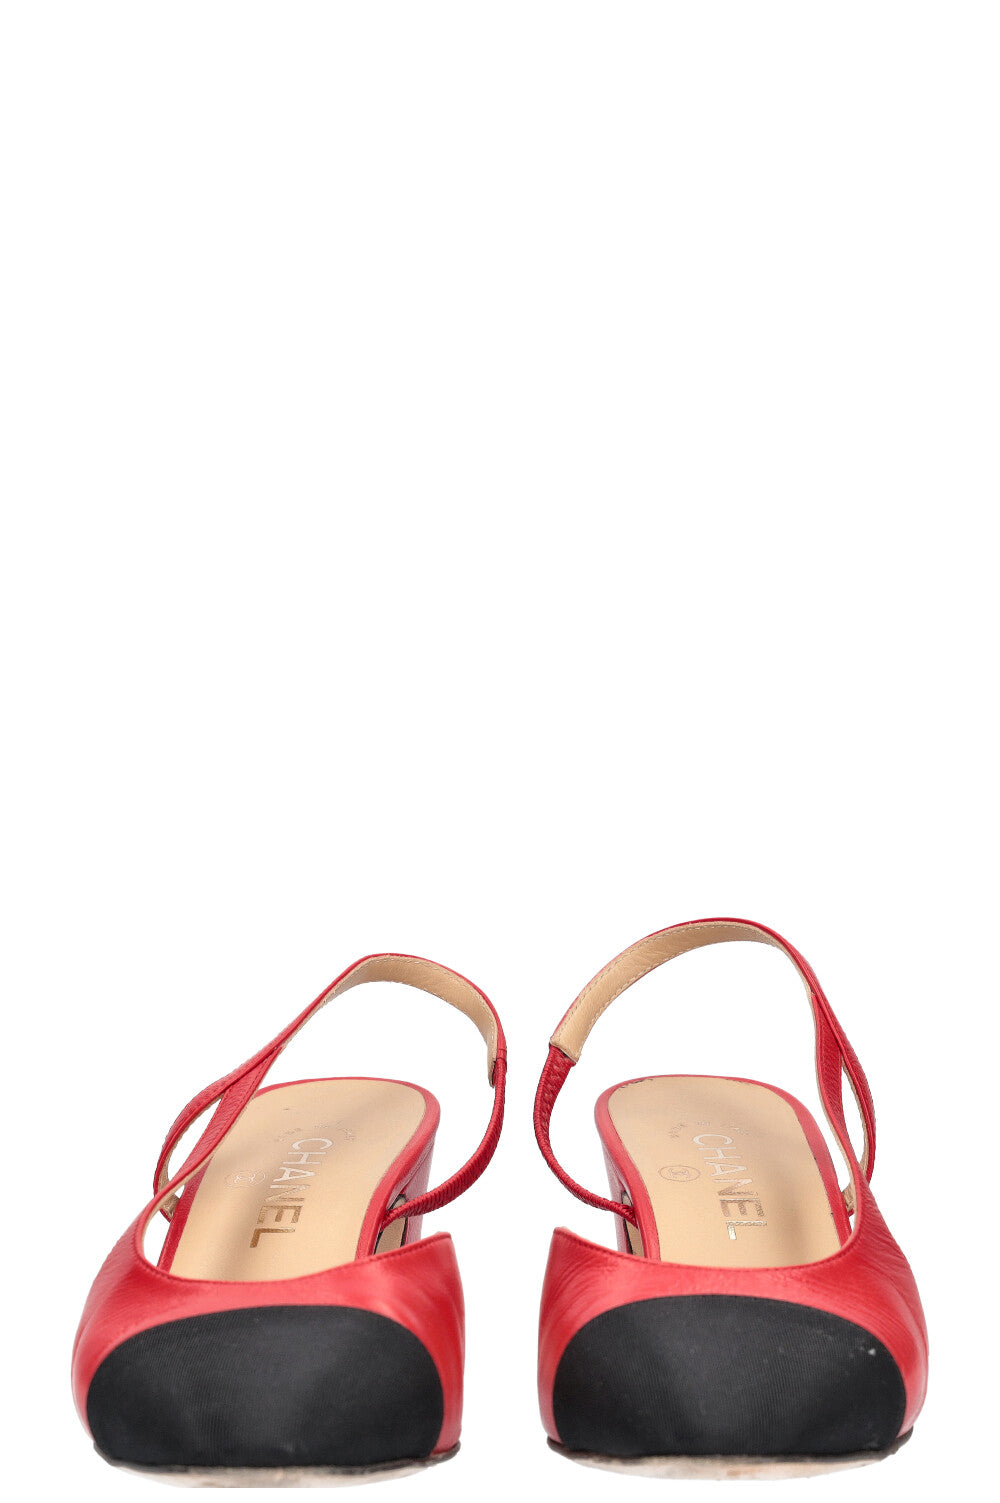 Chanel Red Pumps